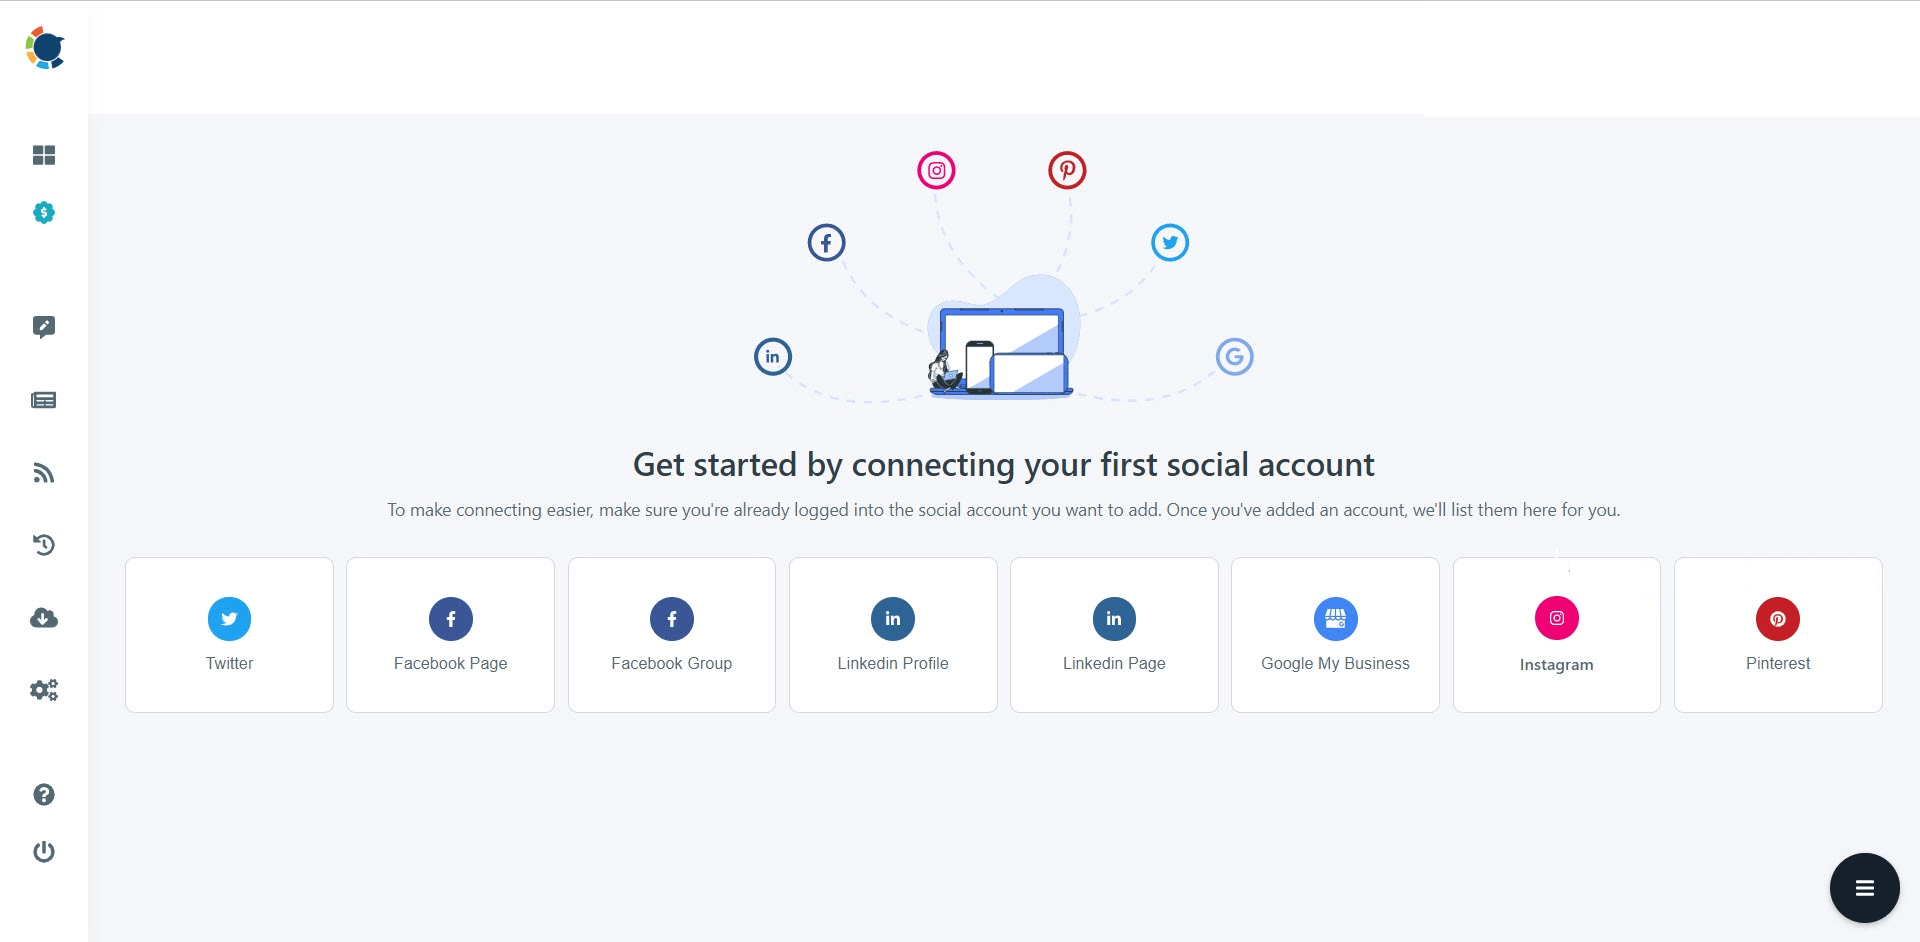 You can schedule Twitter posts easily with Circleboom’s social media management tool.